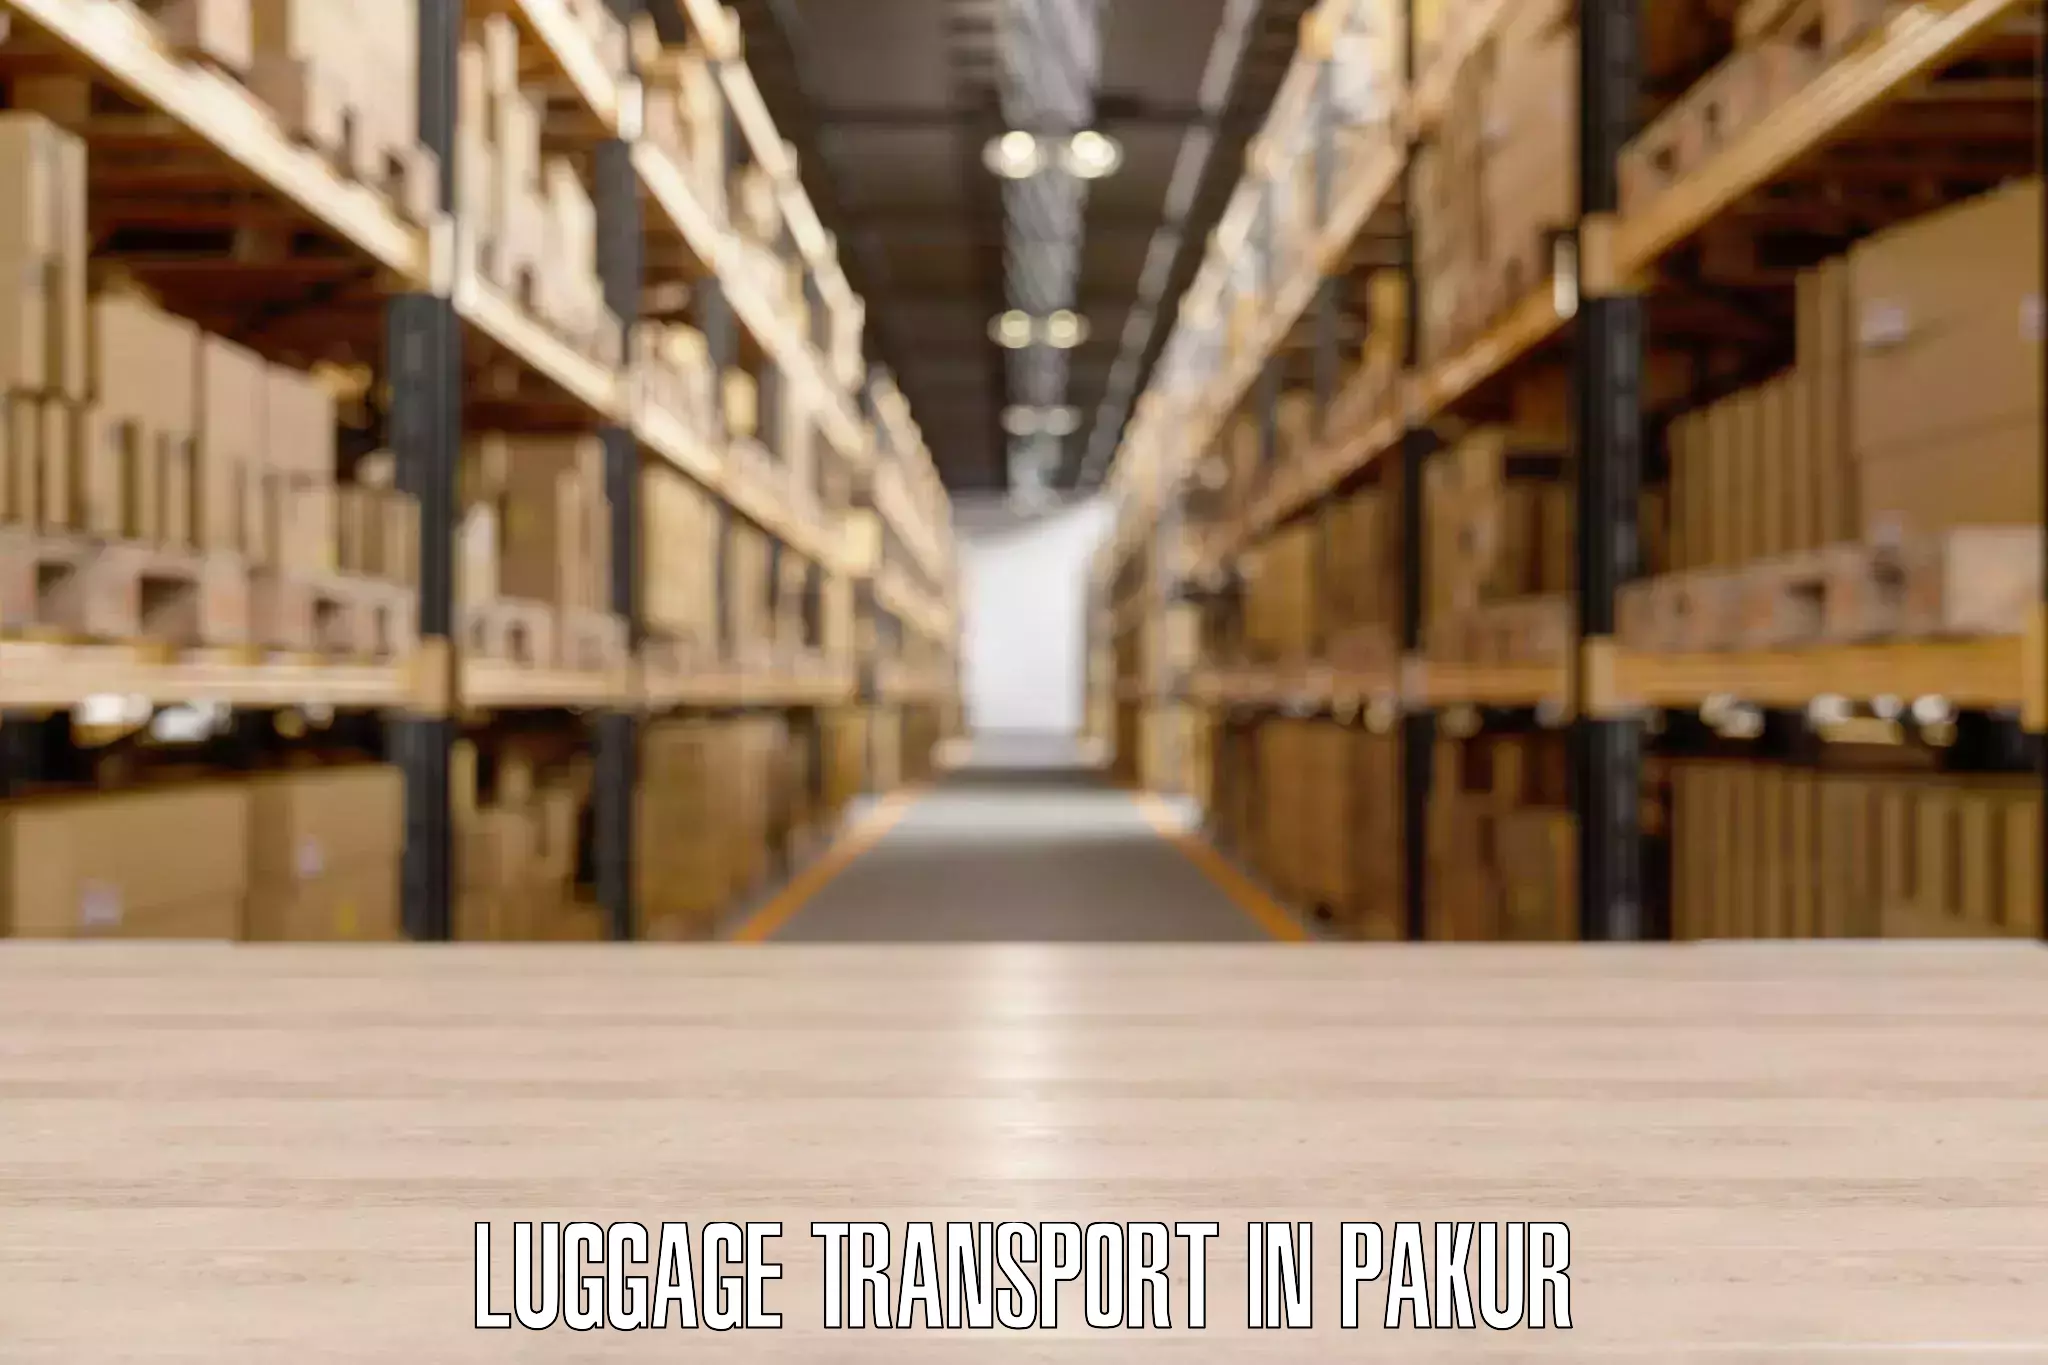 Luggage transport company in Pakur